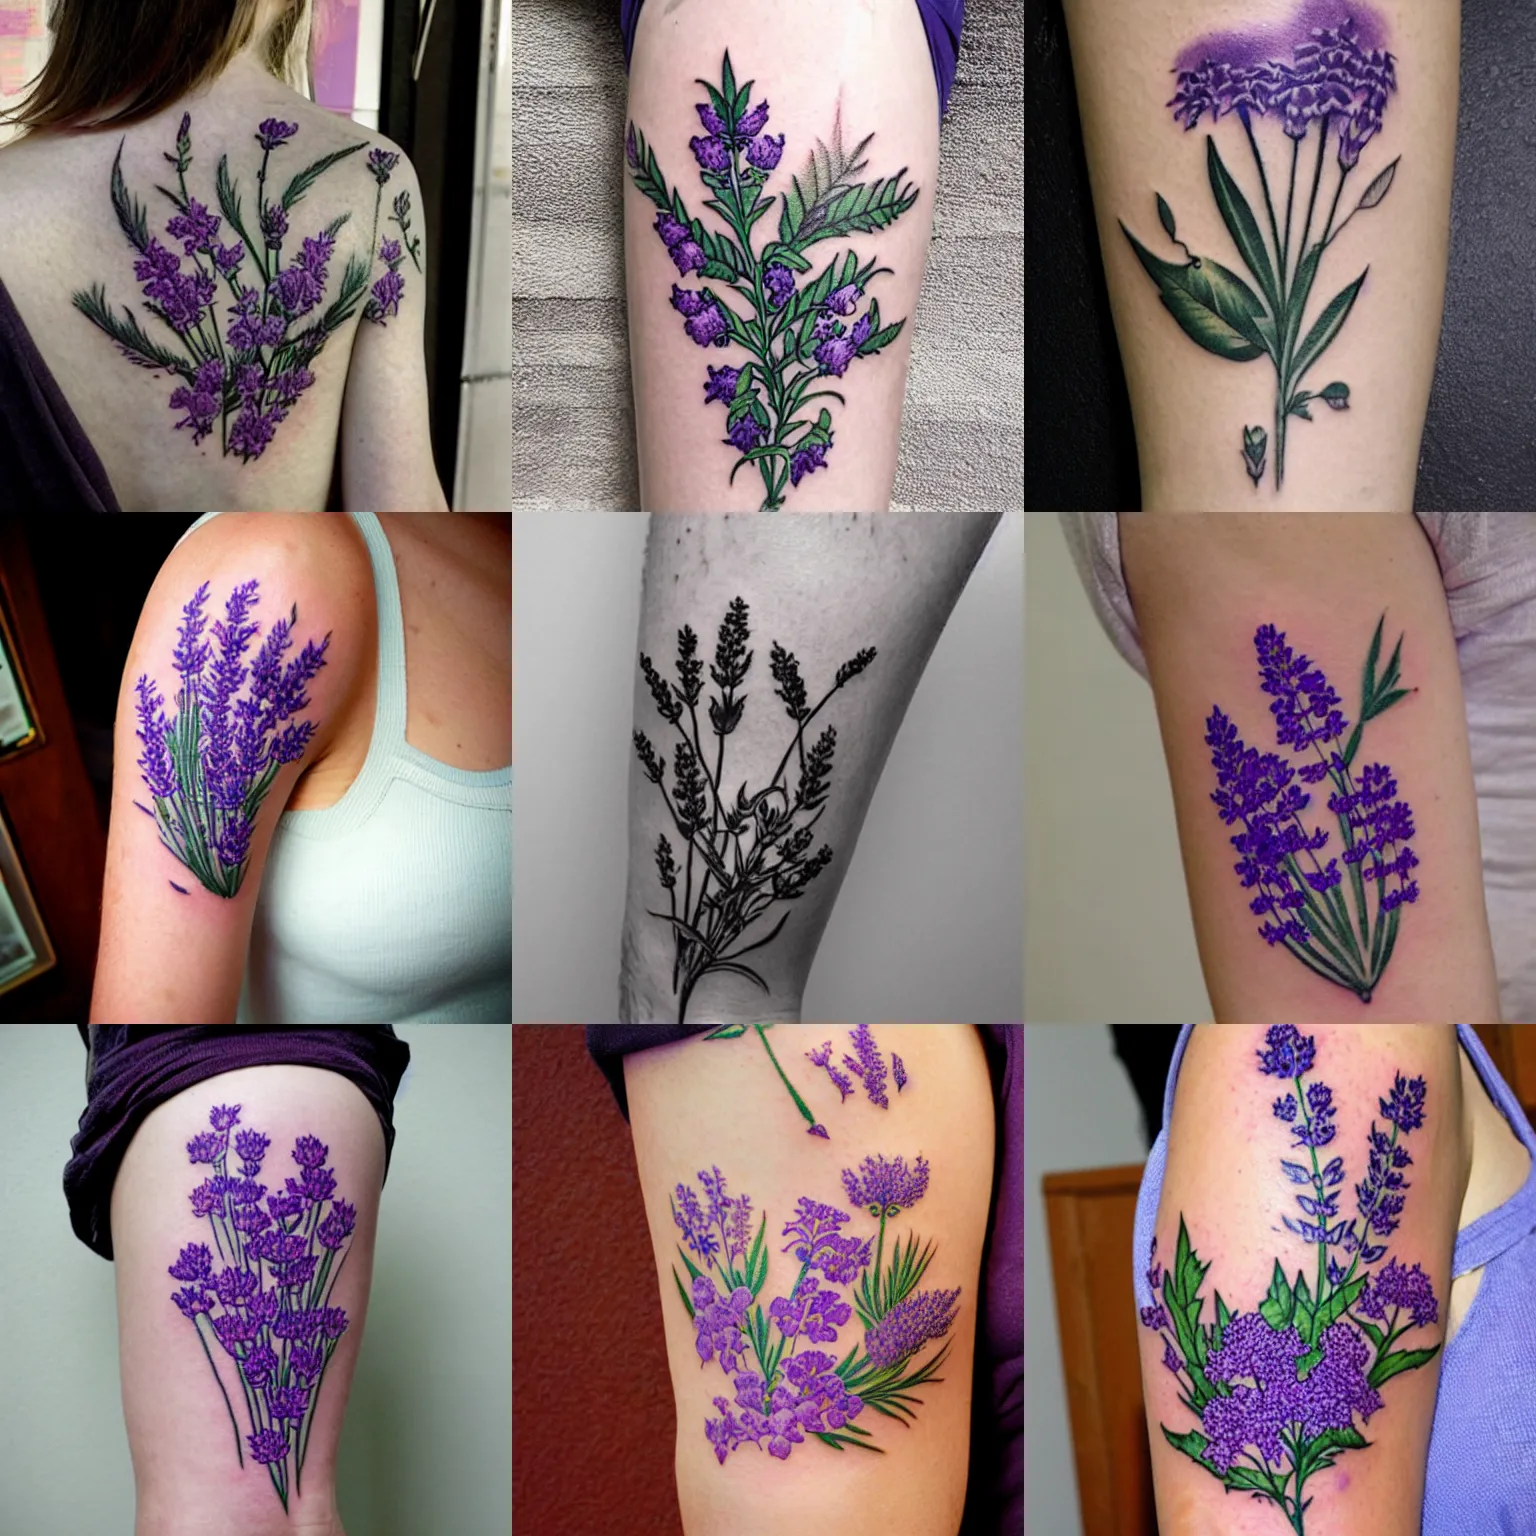 Prompt: botanical tattoo of verbena and lavender flowers, by escher inking on skin